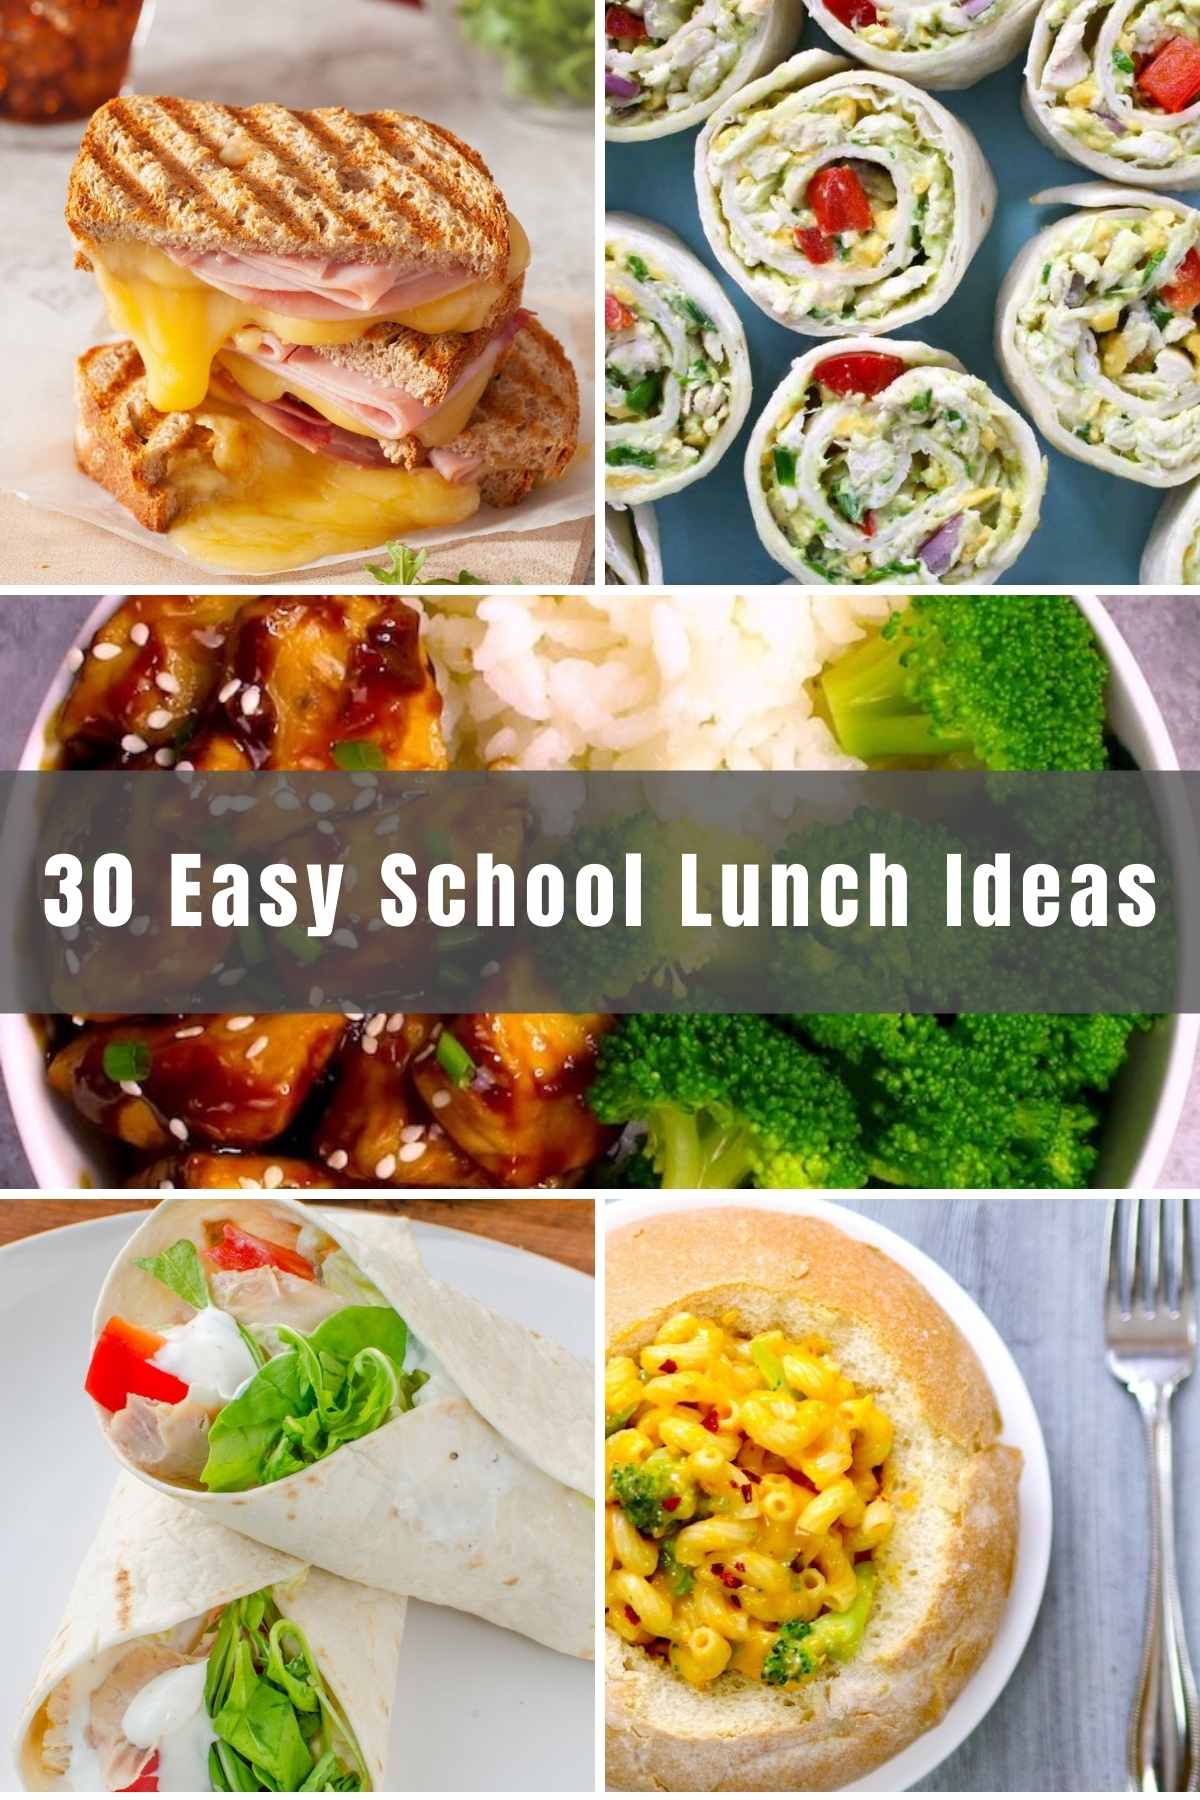 Are you running out of inspiration for your kids’ school lunches? From classic egg salad sandwiches, to fruit and yogurt parfaits, to pretzel hot dogs, we’ve rounded up 30 easy lunch ideas that will satisfy the pickiest of eaters!